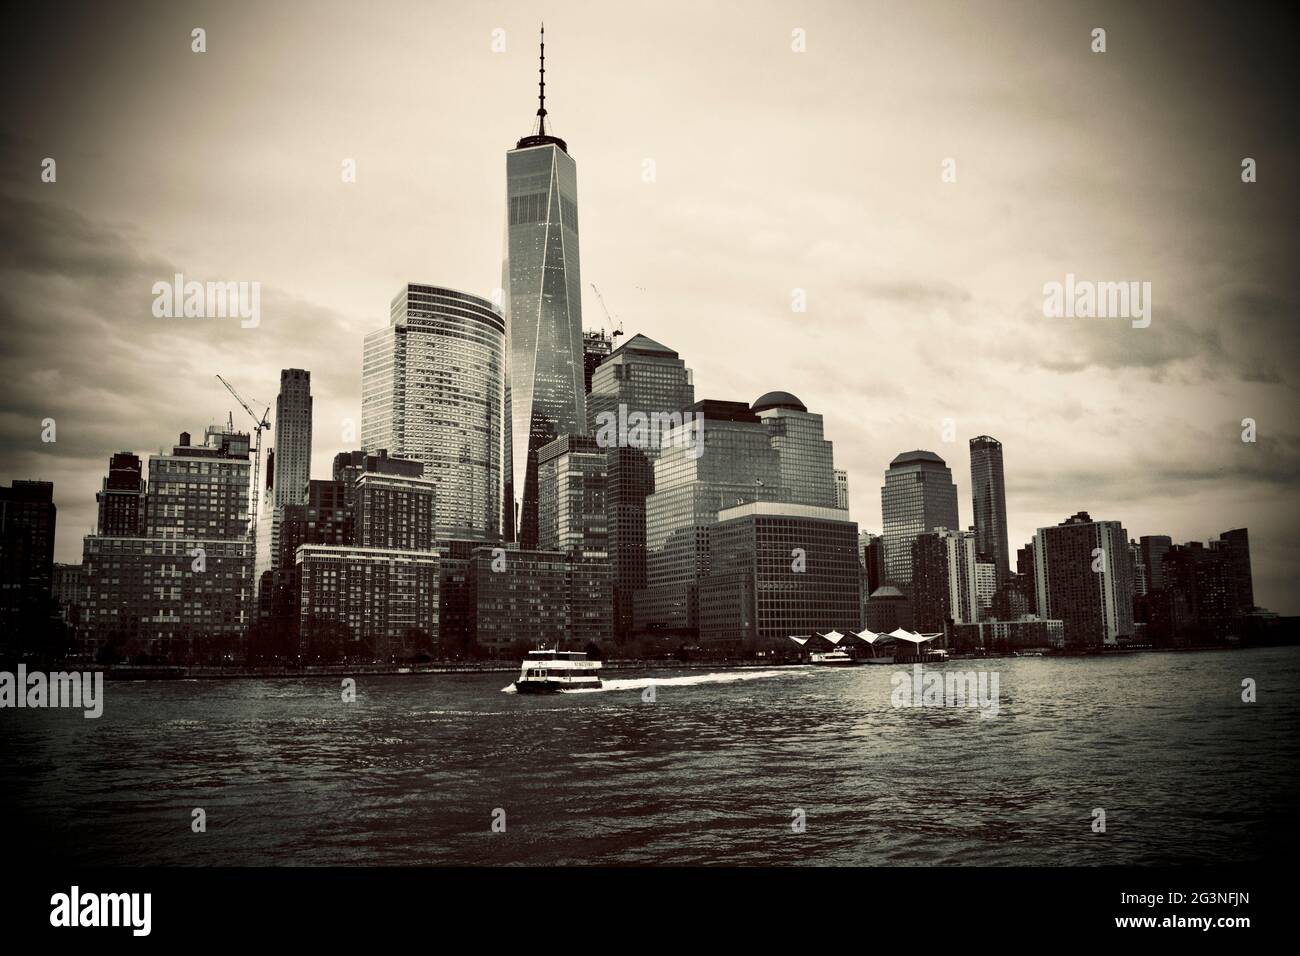 The World Trade Center in Manhattan, NYC from the New York Waterway ferry on the Hudson River. Stock Photo